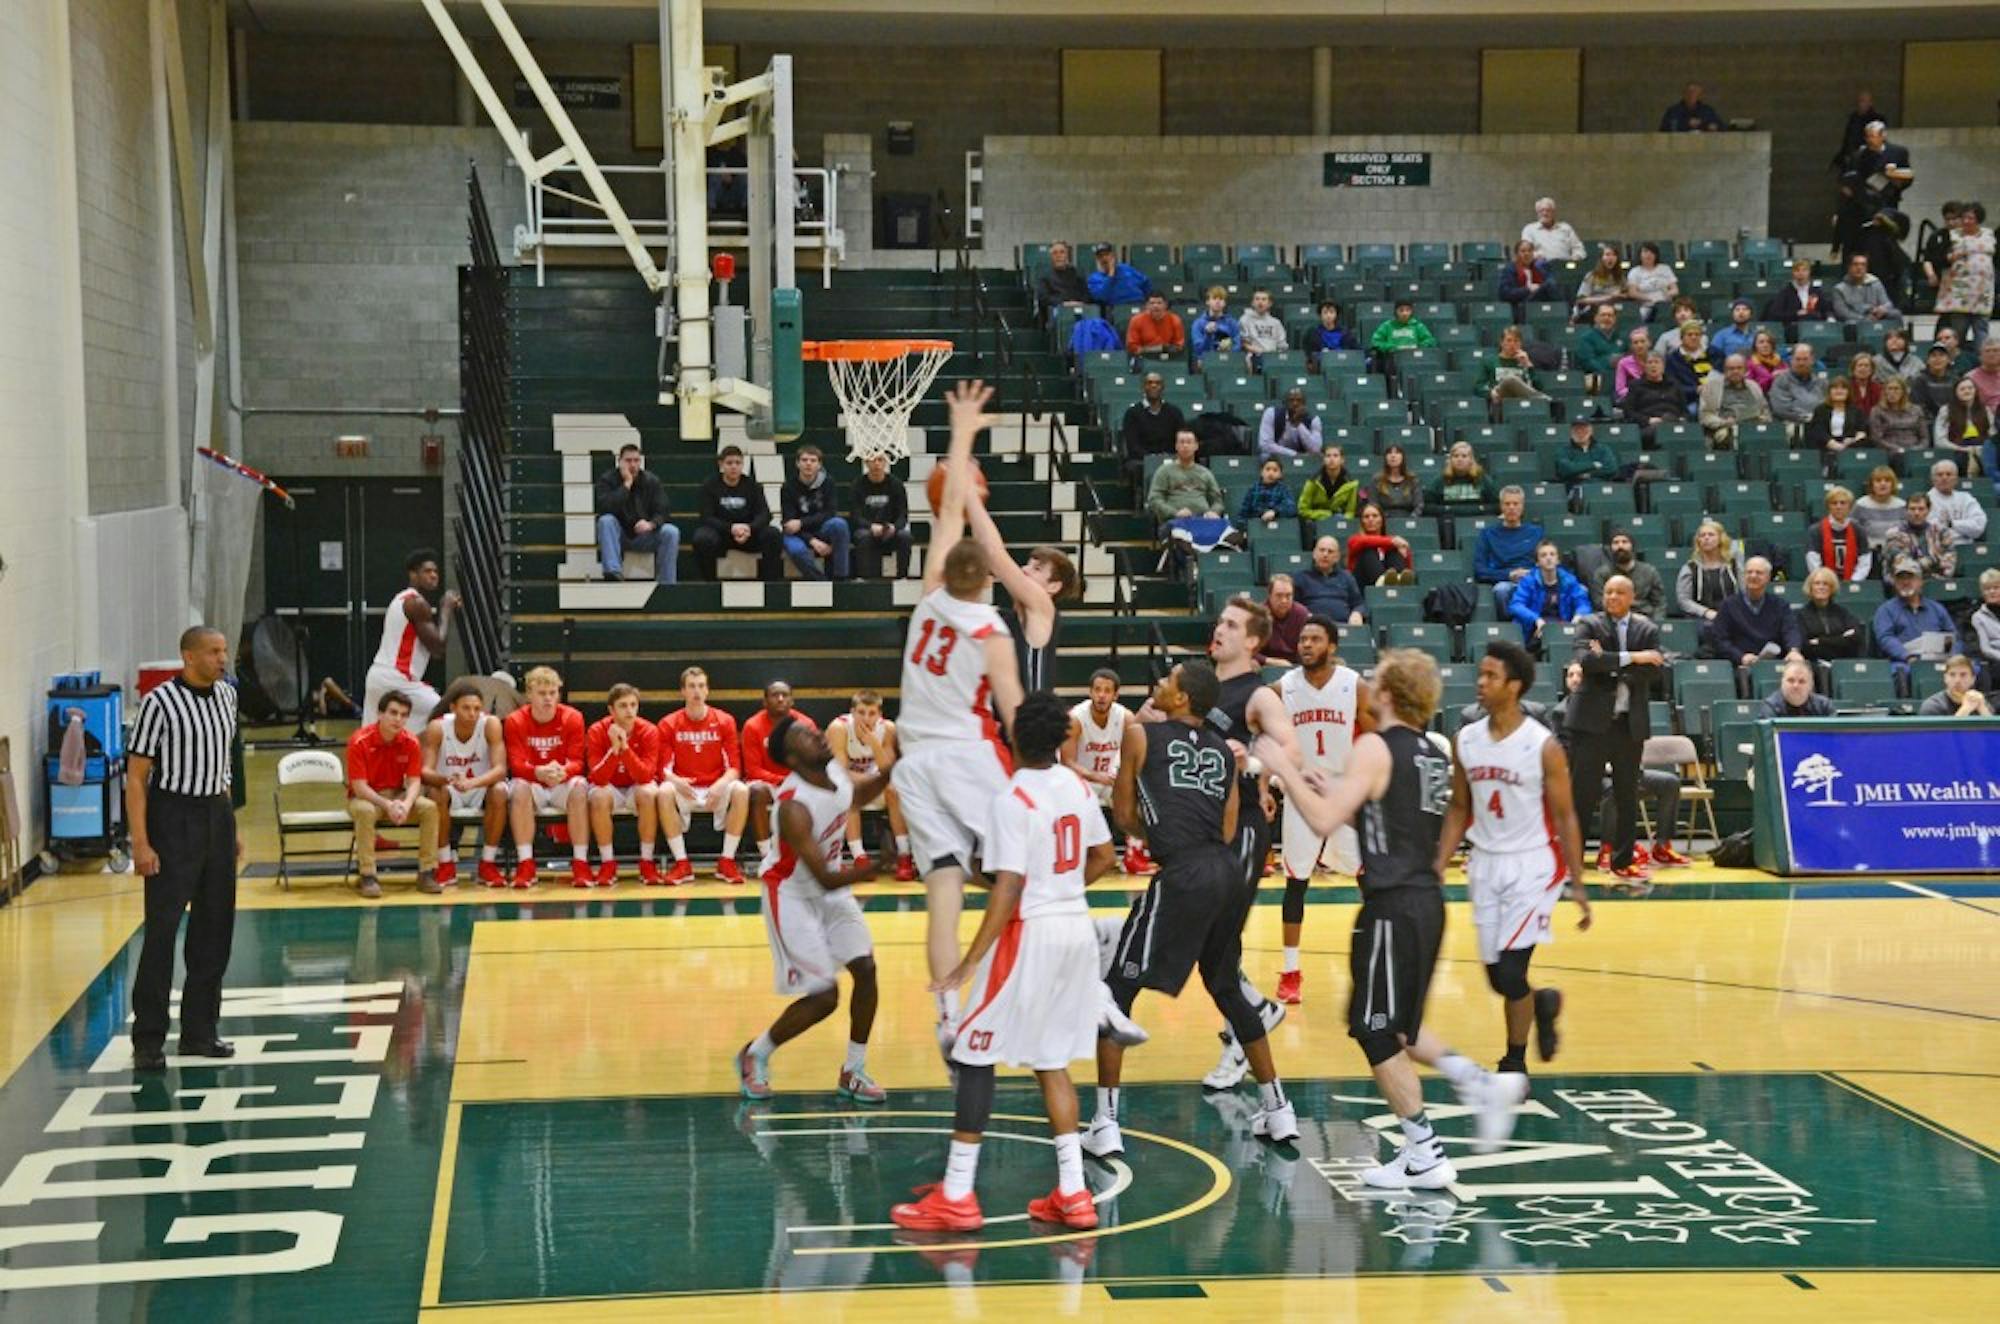 Men's basketball took on Cornell at home this past weekend.